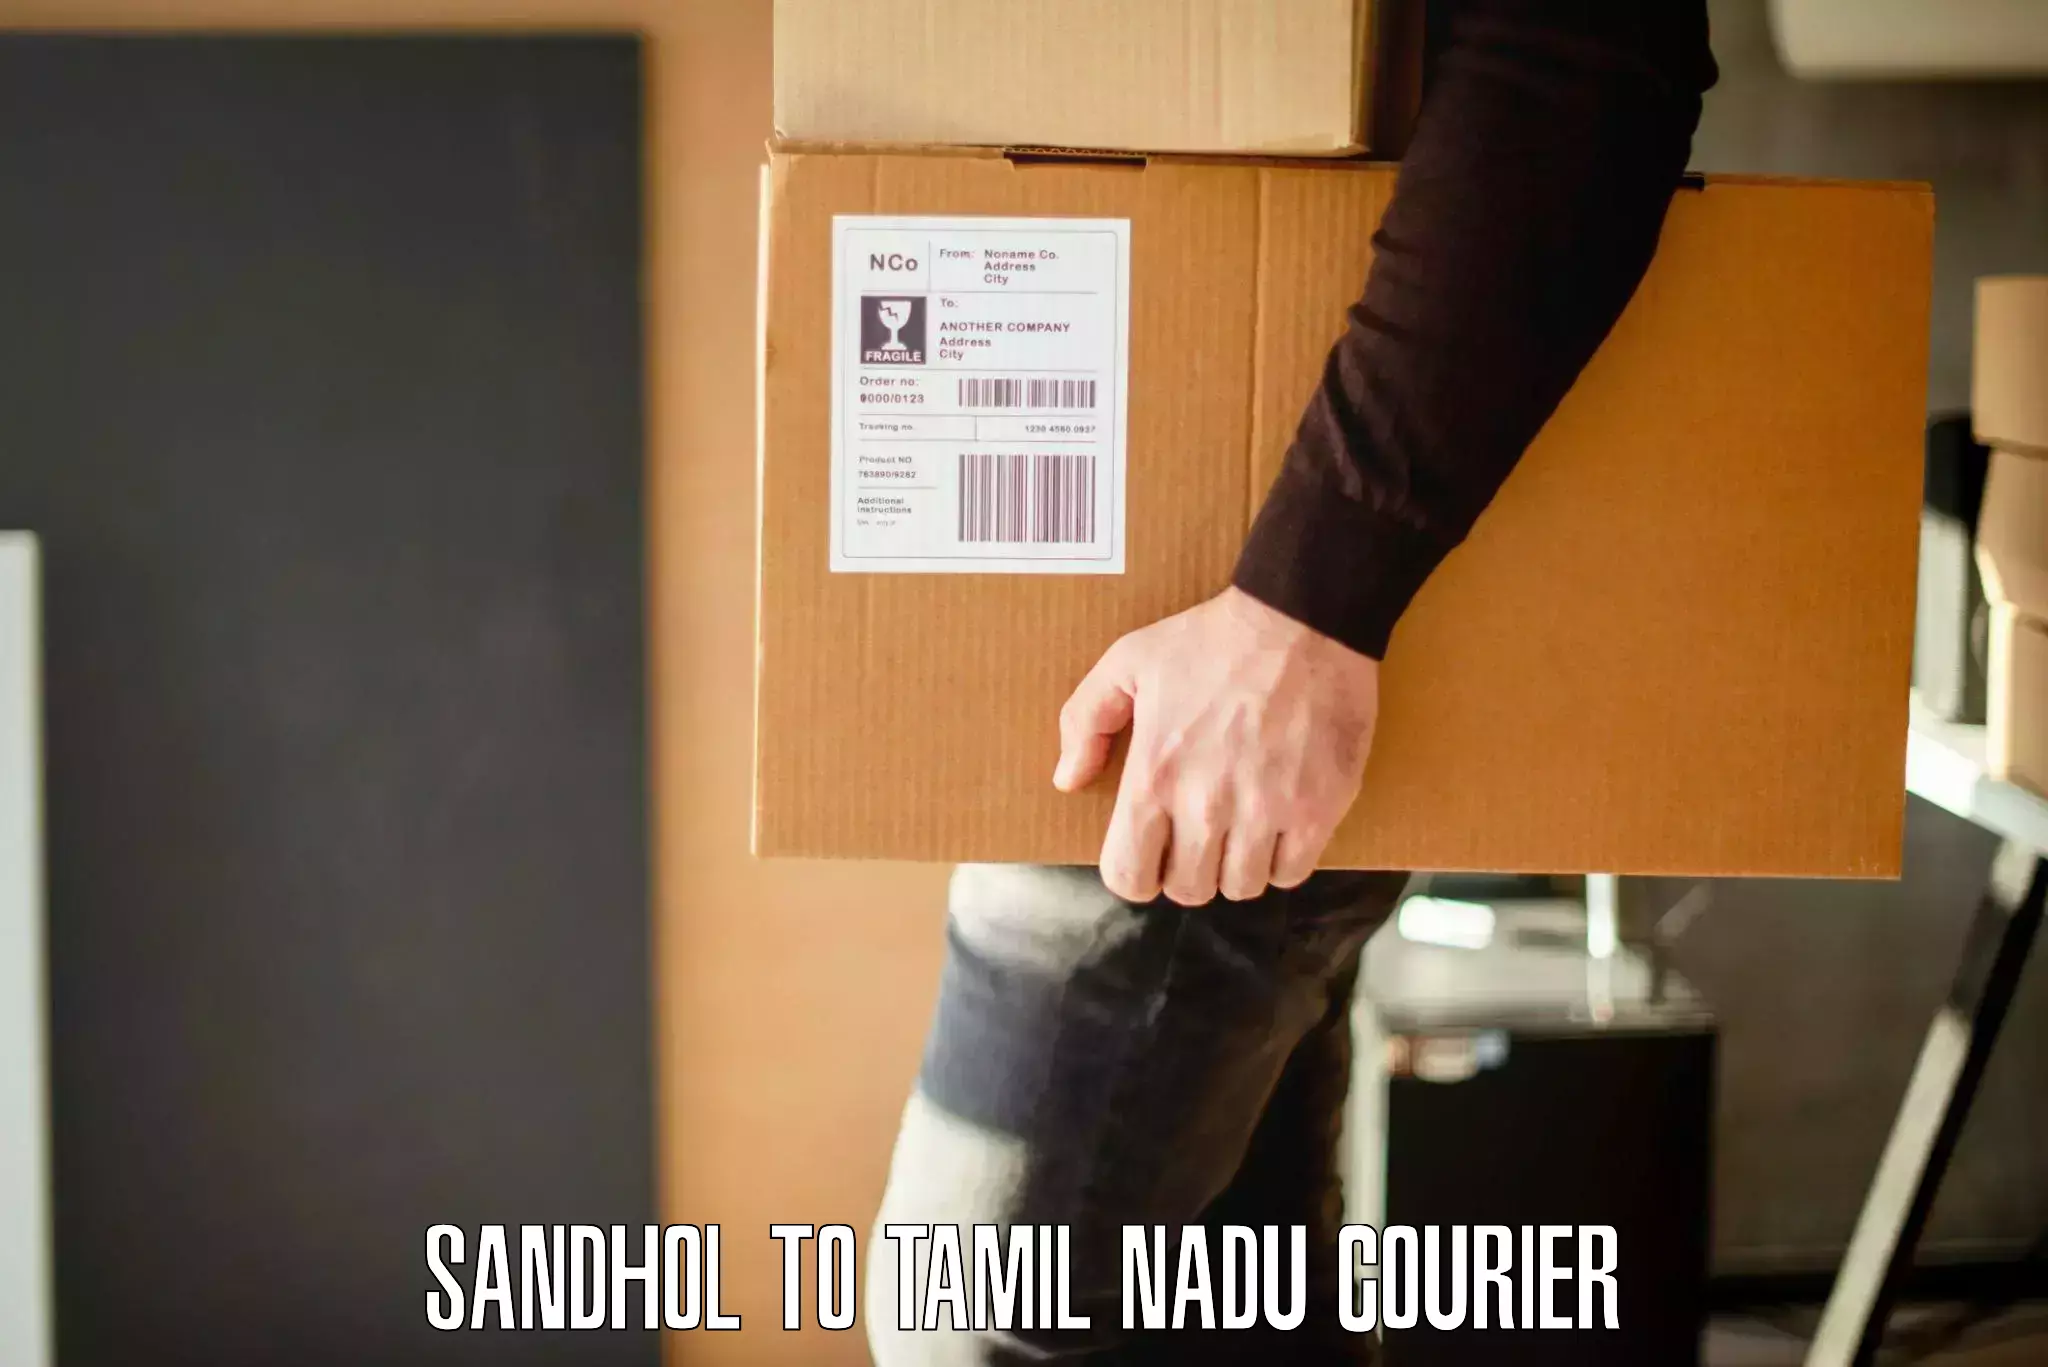 Quality moving and storage in Sandhol to Tamil Nadu